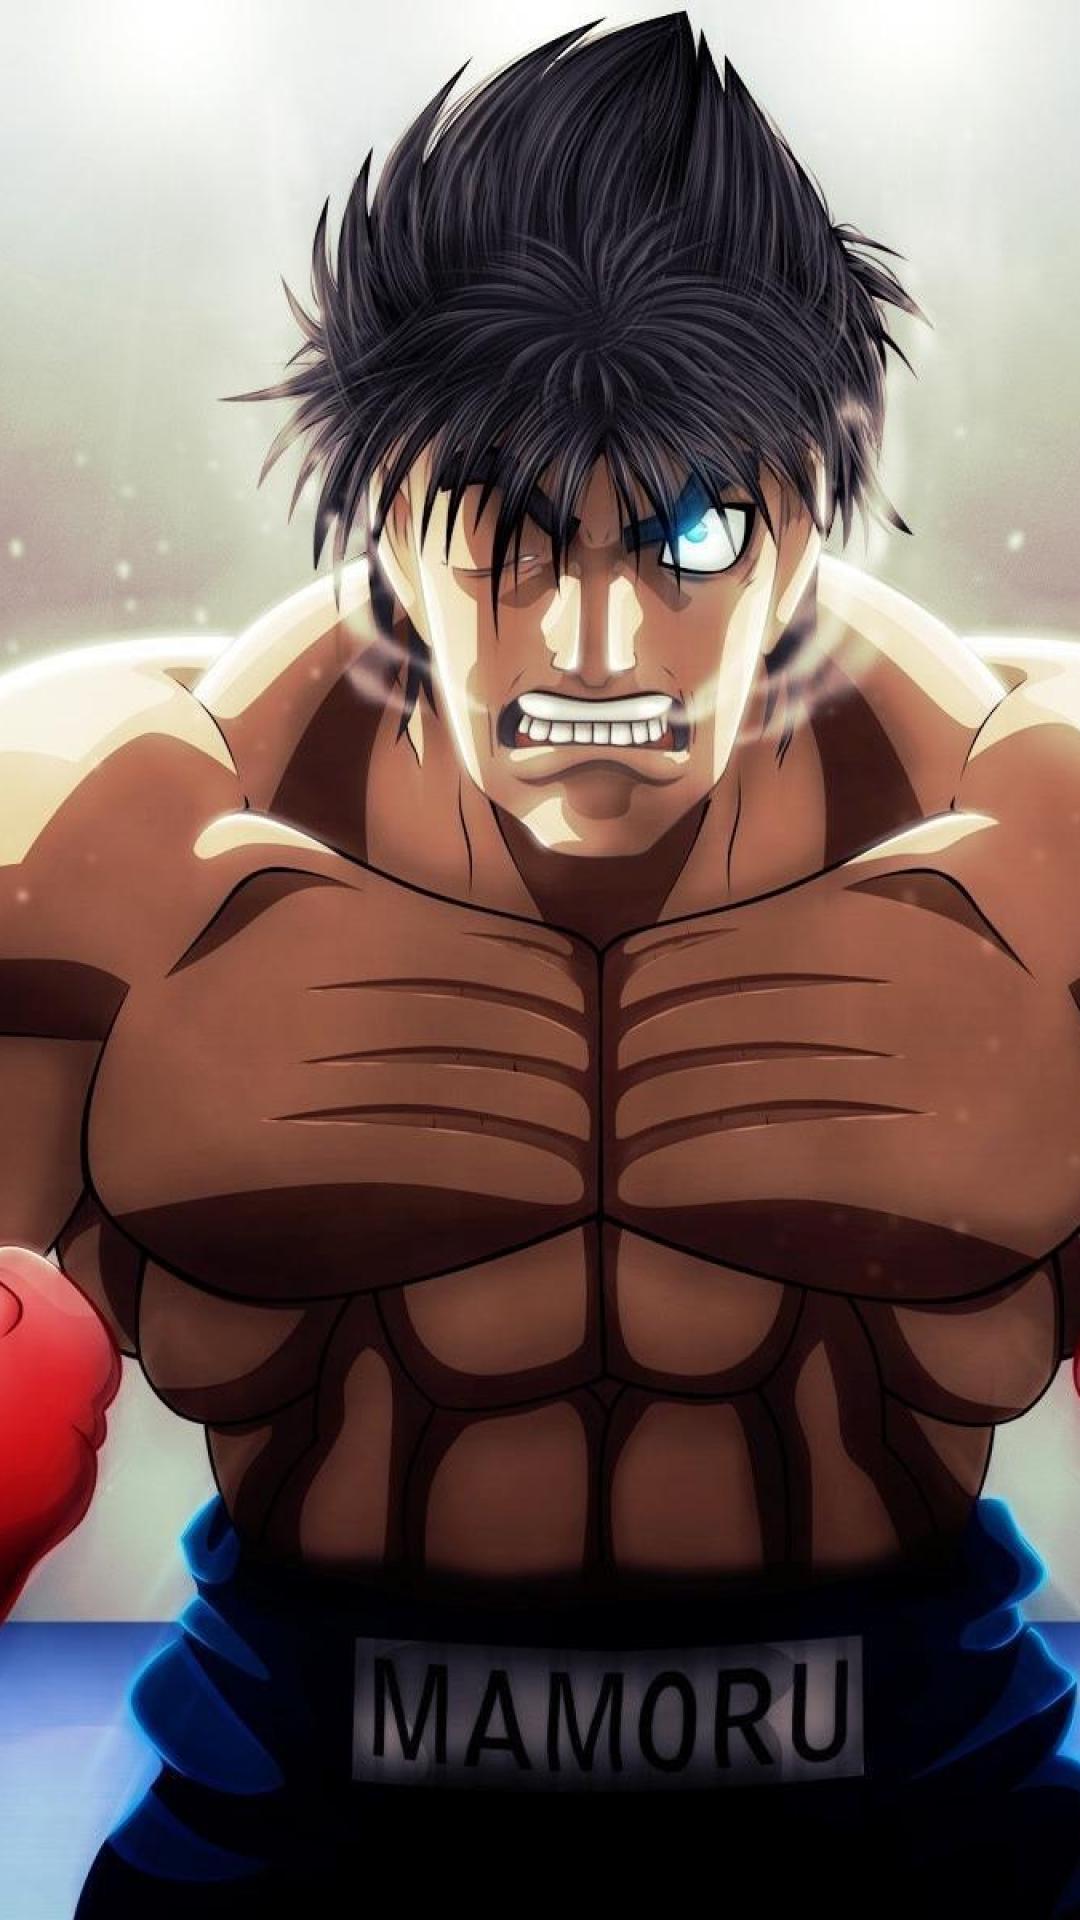 Hajime No Ippo Wallpaper Iphone / And fighting spirit, is a manga by